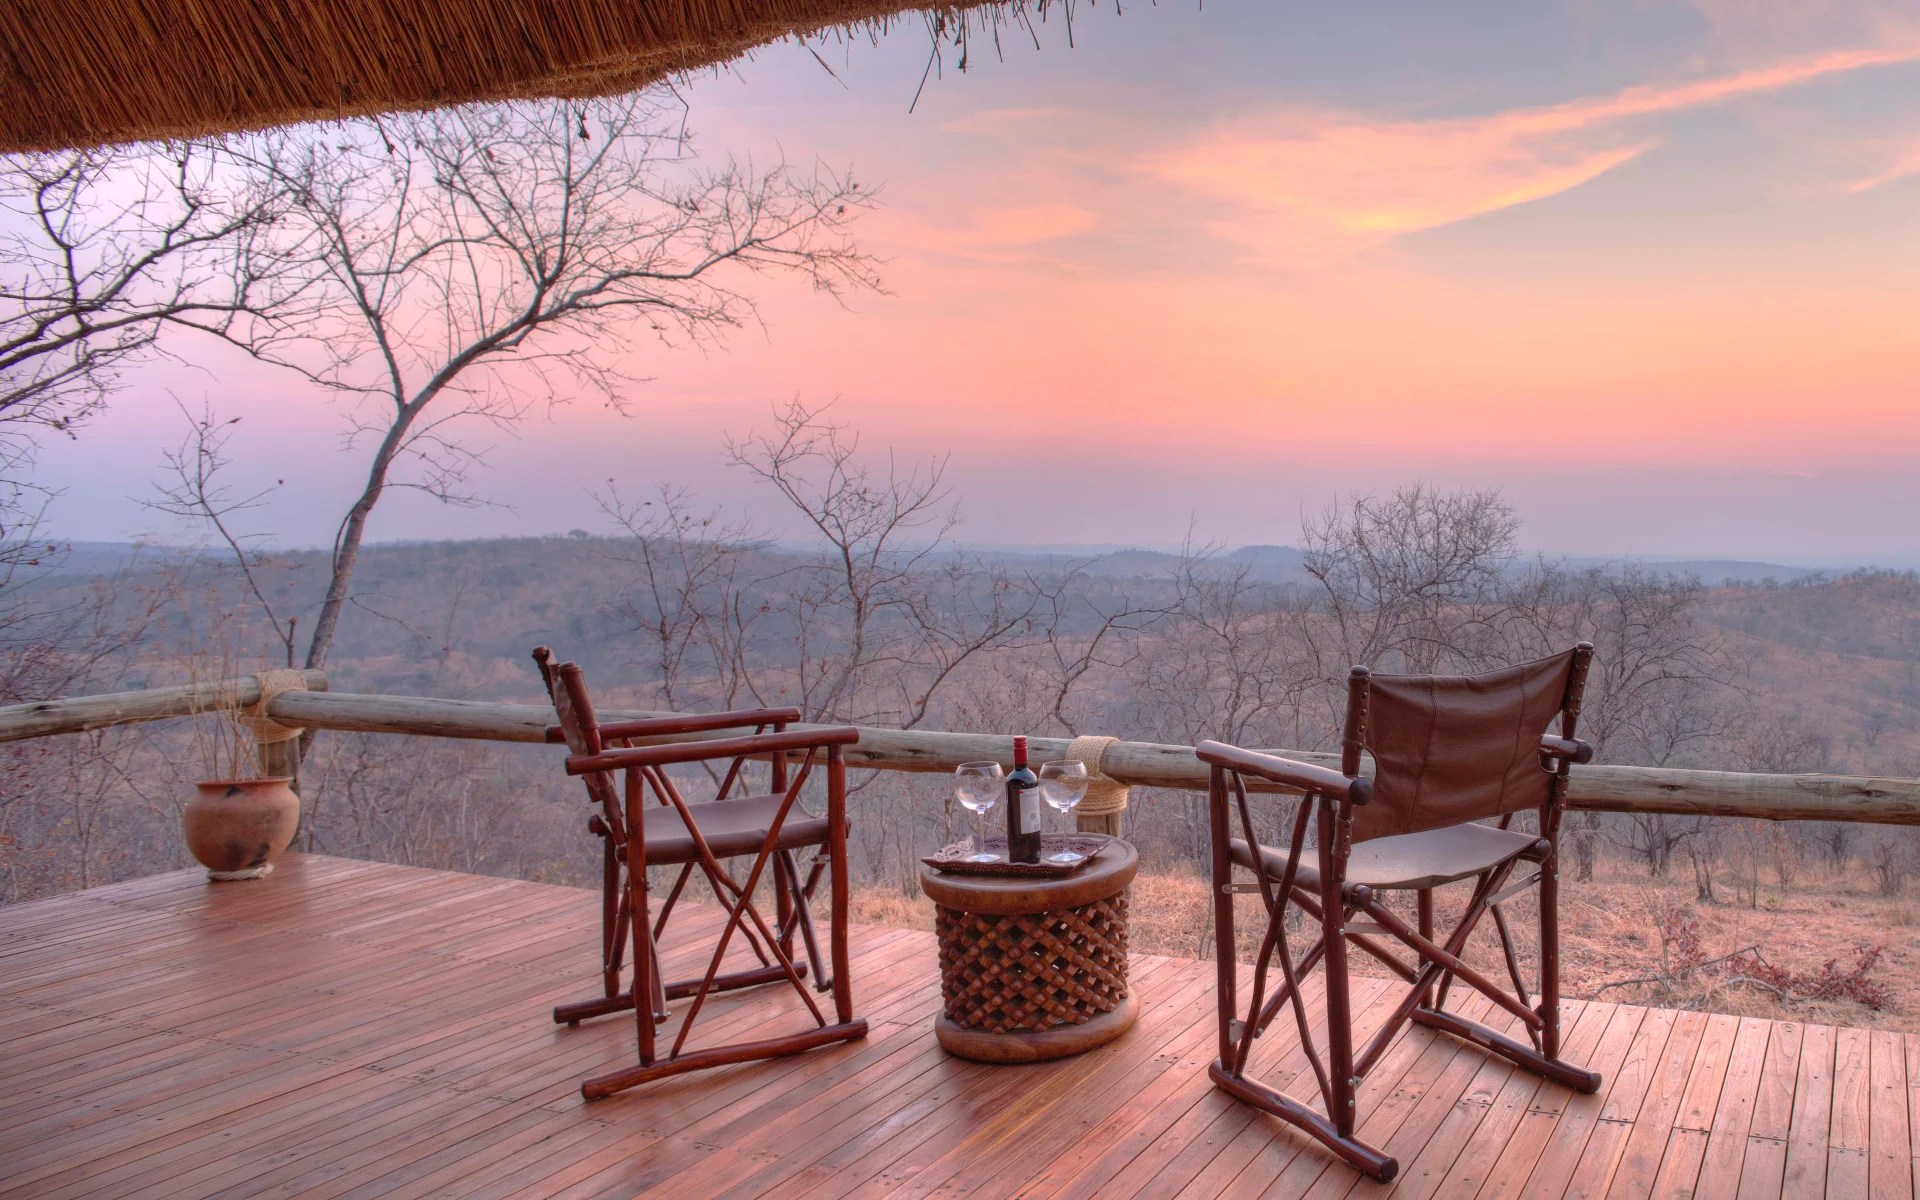 Two camping chairs are set up on the Ikuka Lodge decking, overlooking a beautiful sunset panorama.